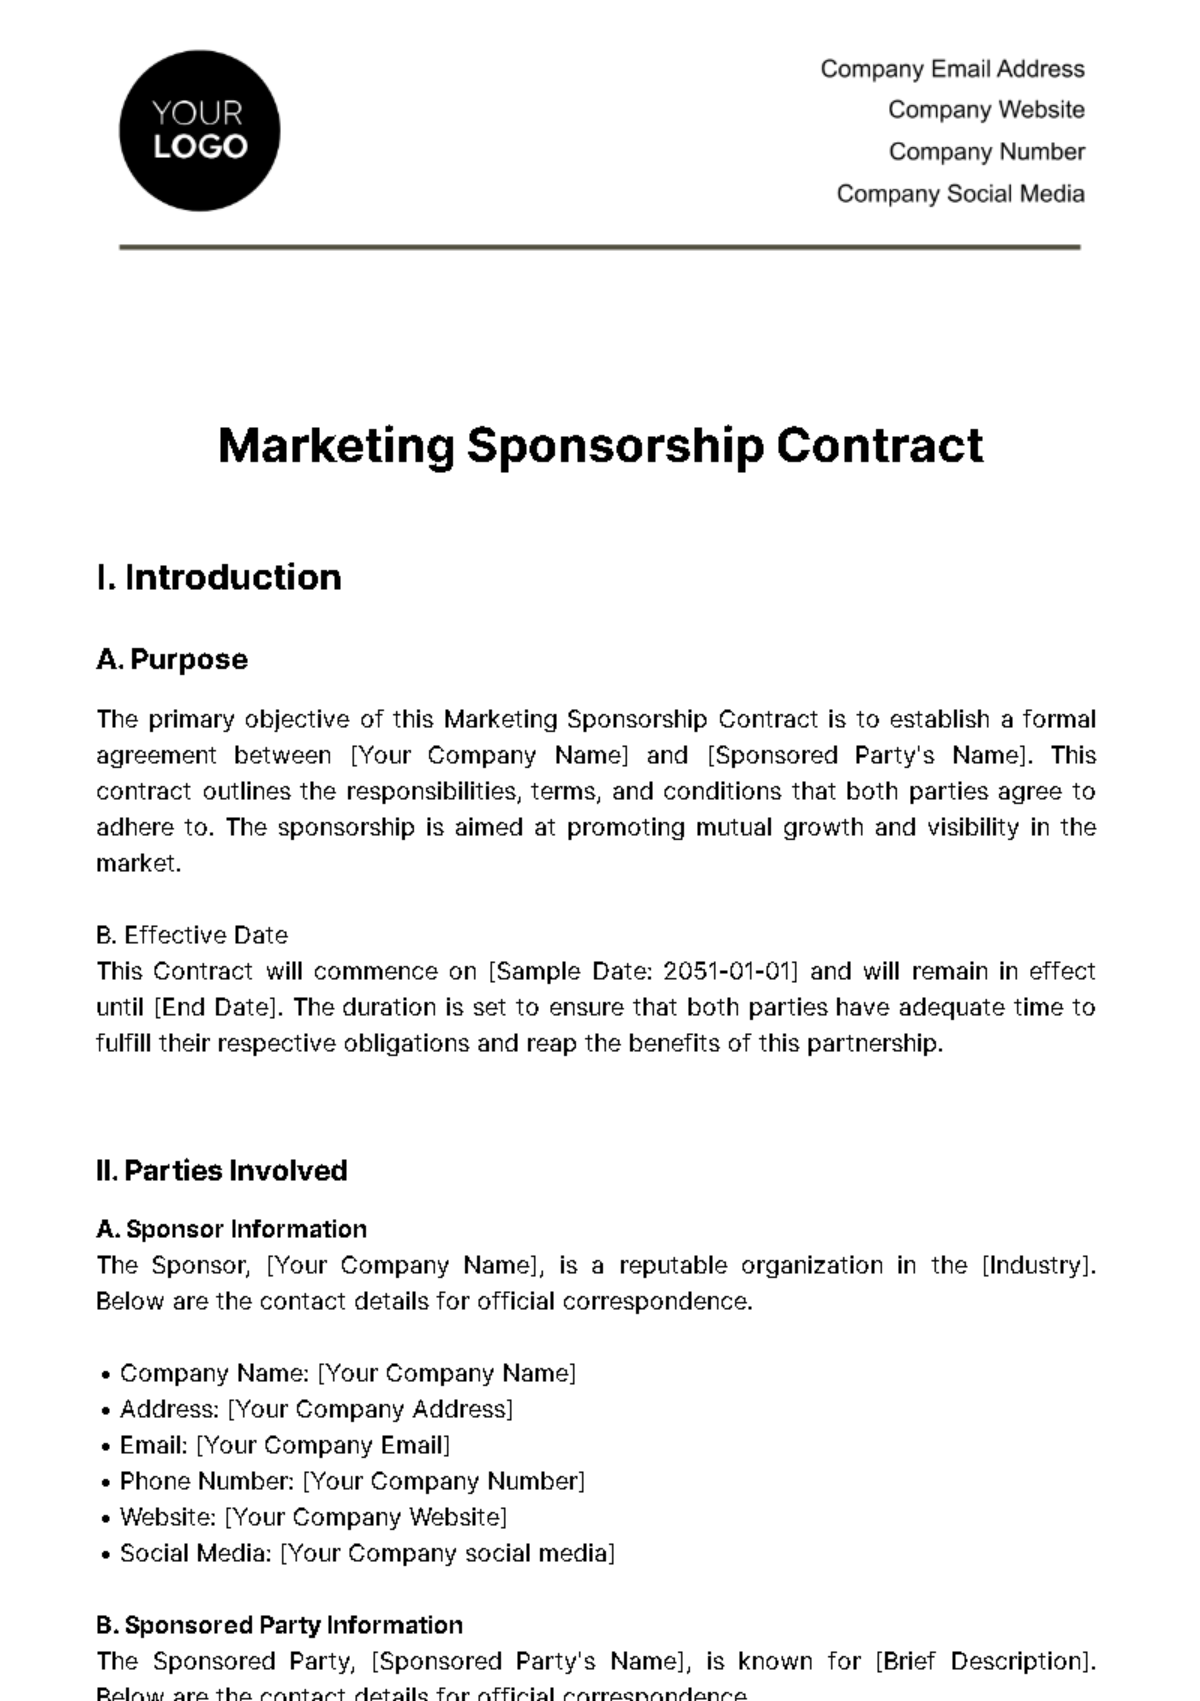 Marketing Sponsorship Contract Template